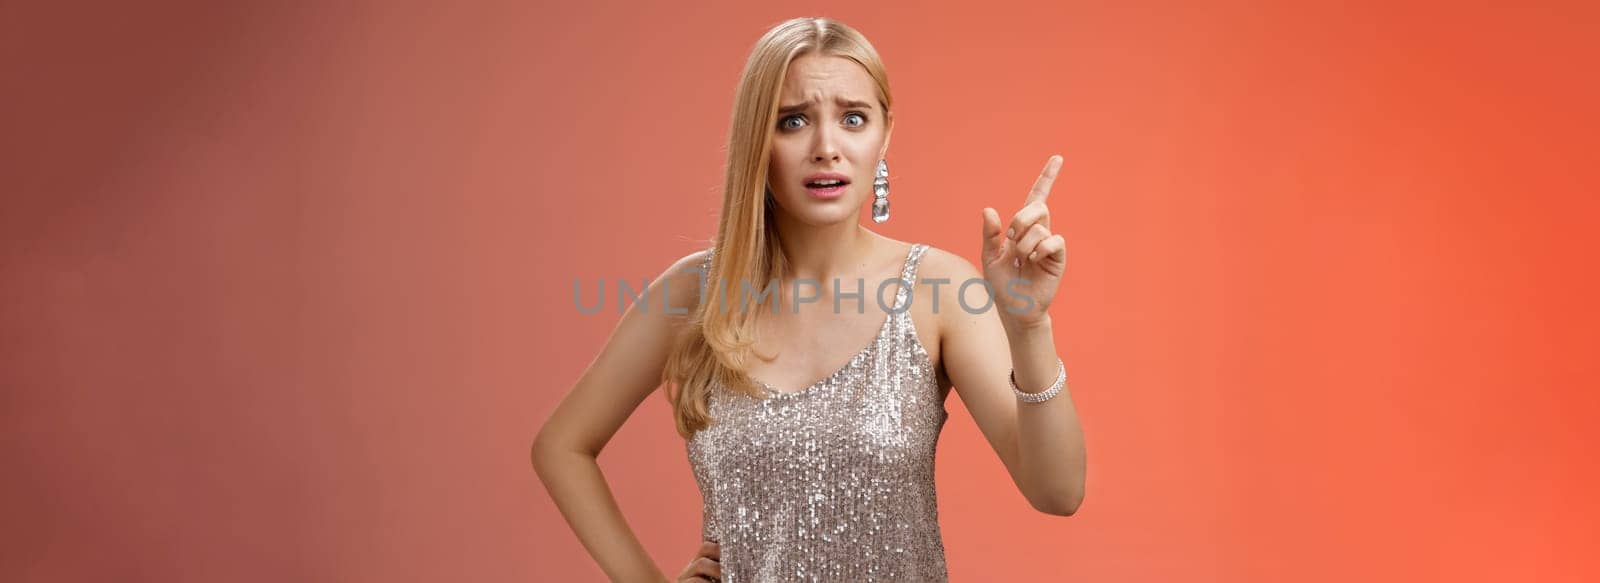 How could you. Disappointed let down upset complaining young woman demanding respect raise index finger scolding teaching lesson give instructions standing bothered displeased, red background.